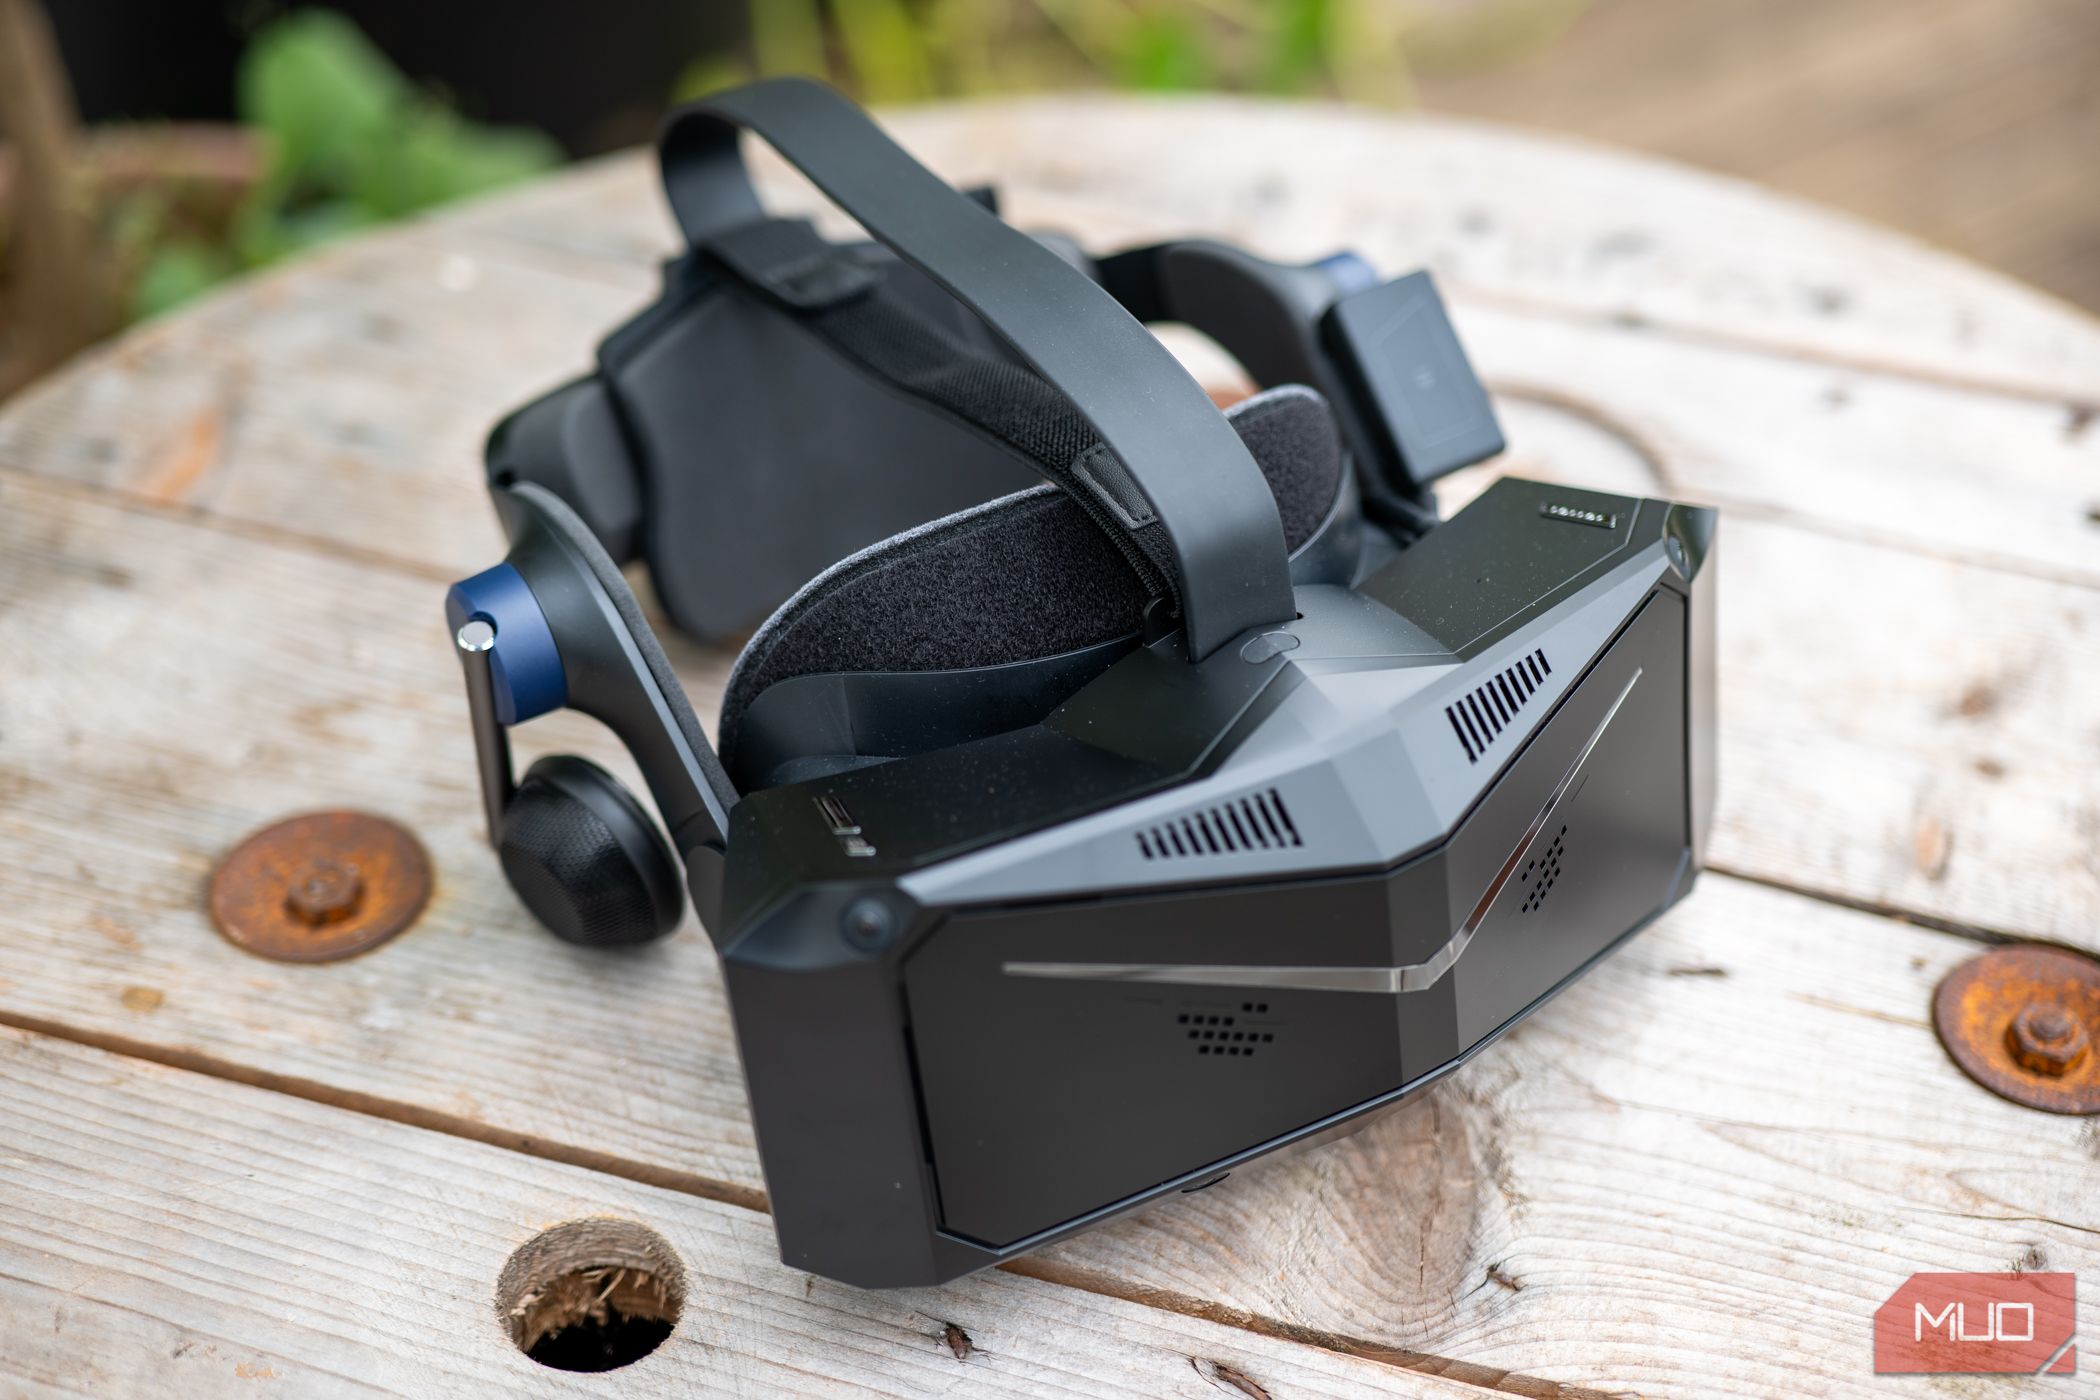 Pimax Crystal VR headset review